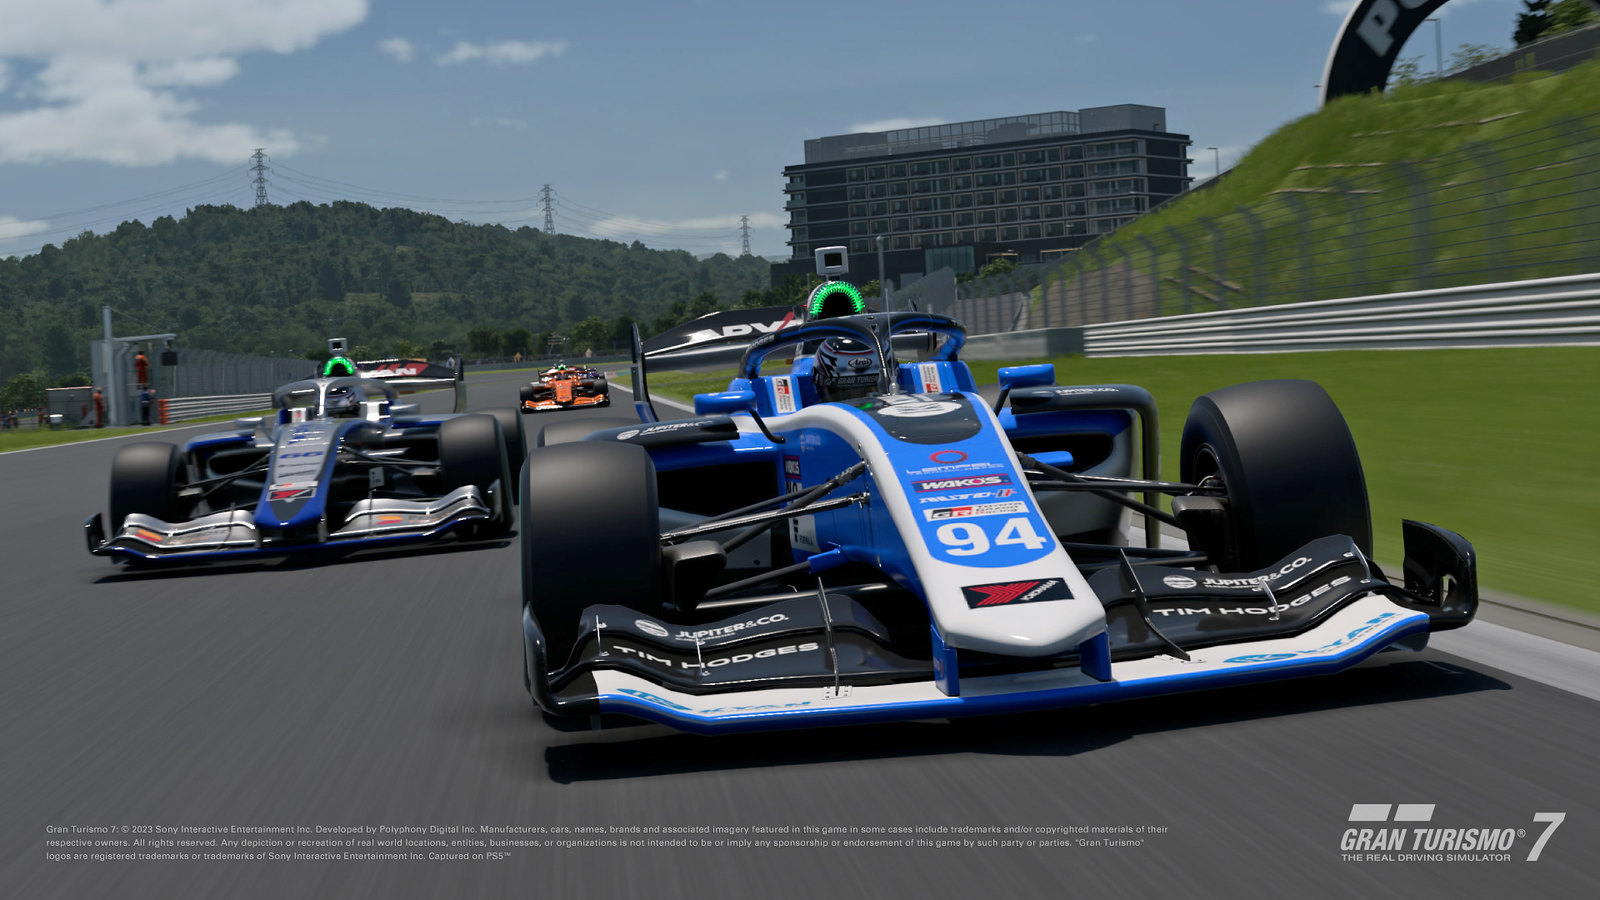 52835696800 1B6D9Eacf8 H Gran Turismo 7 Update 1.32 Going Live Today With 4